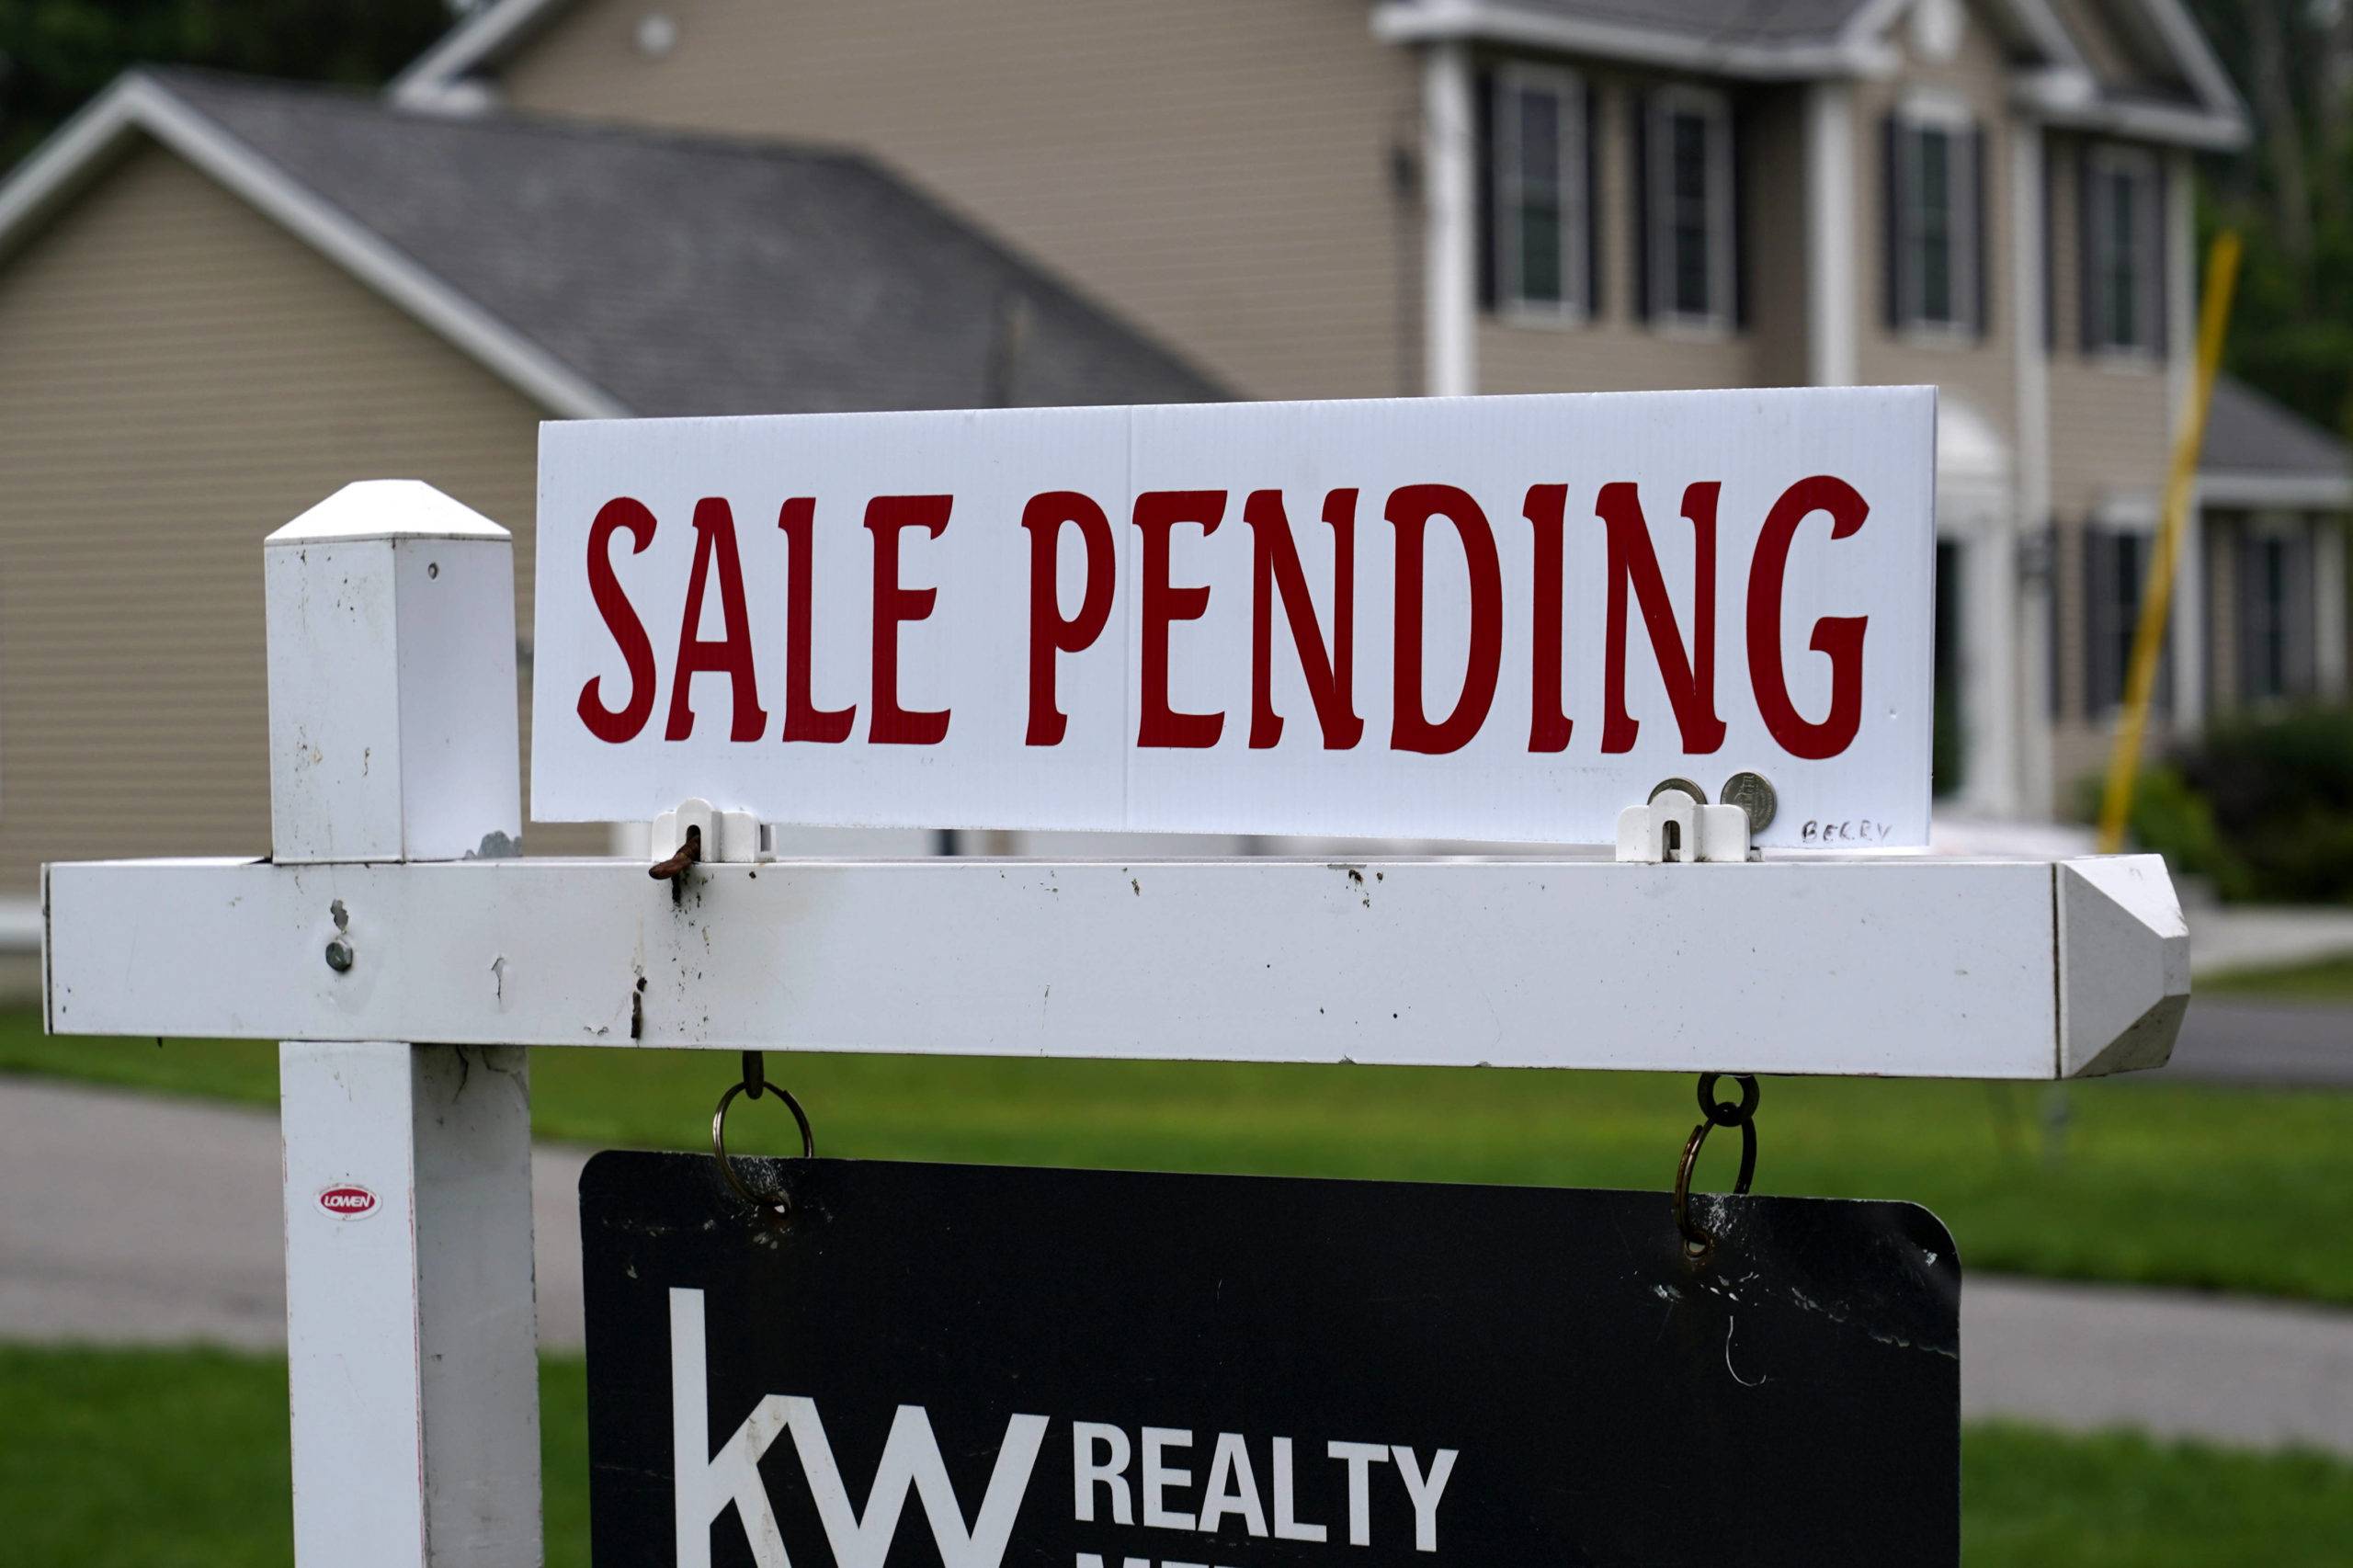 A "sale pending" sign is posted outside a single family home in a residential neighborhood, Wednesday, July 14, 2021, in Derry, N.H. Mortgage rates were mixed this week. The benchmark 30-year loan fell for the third straight week amid lingering concerns over the recent surge in inflation.   (AP Photo/Charles Krupa)/NYBZ510/21196608729891//2107151939